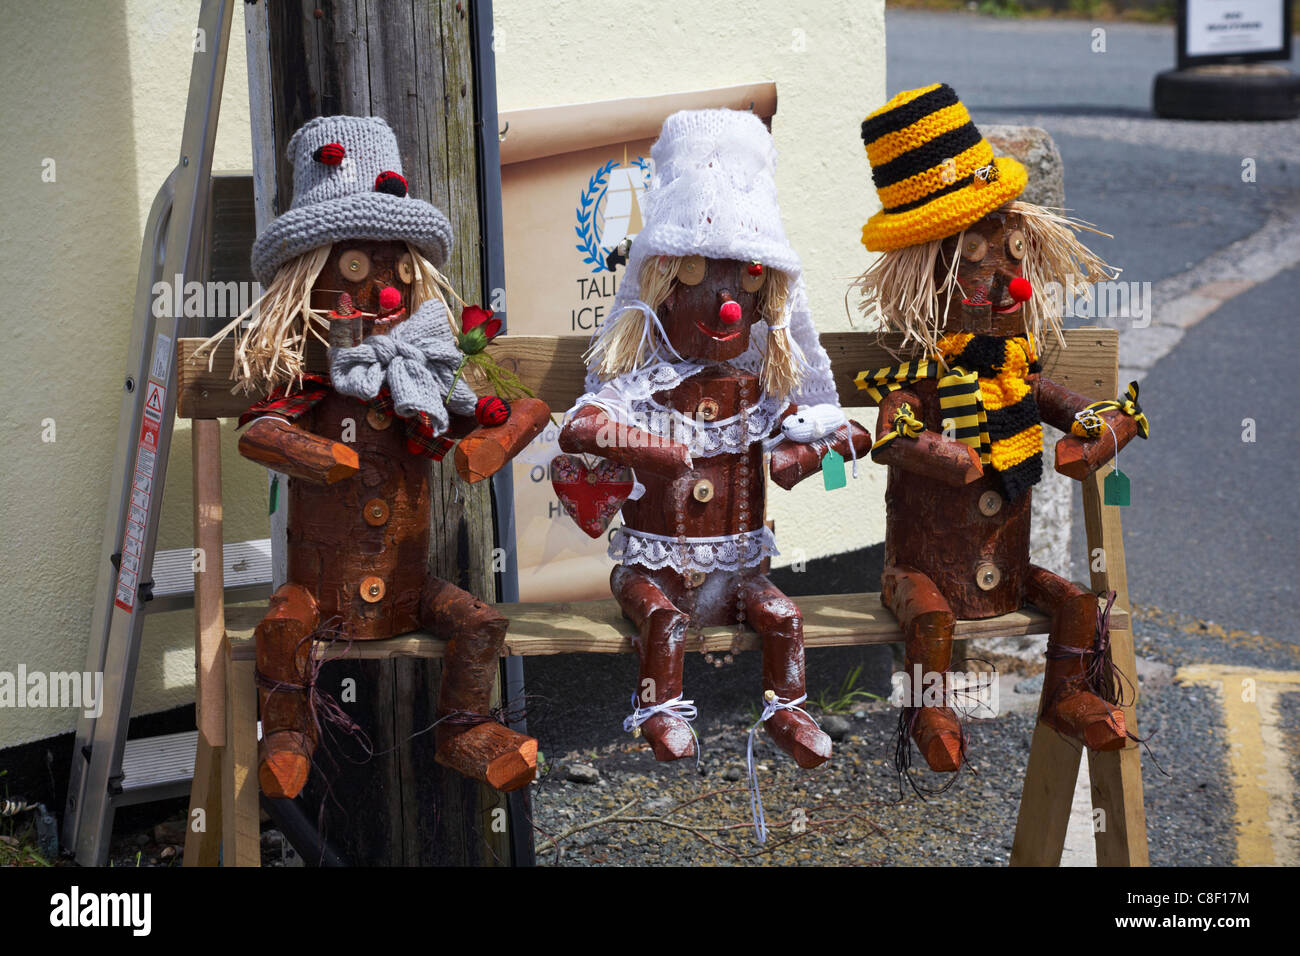 Wooden carved characters dressed up, sat on bench outside shop in Charlestown, Cornwall Stock Photo